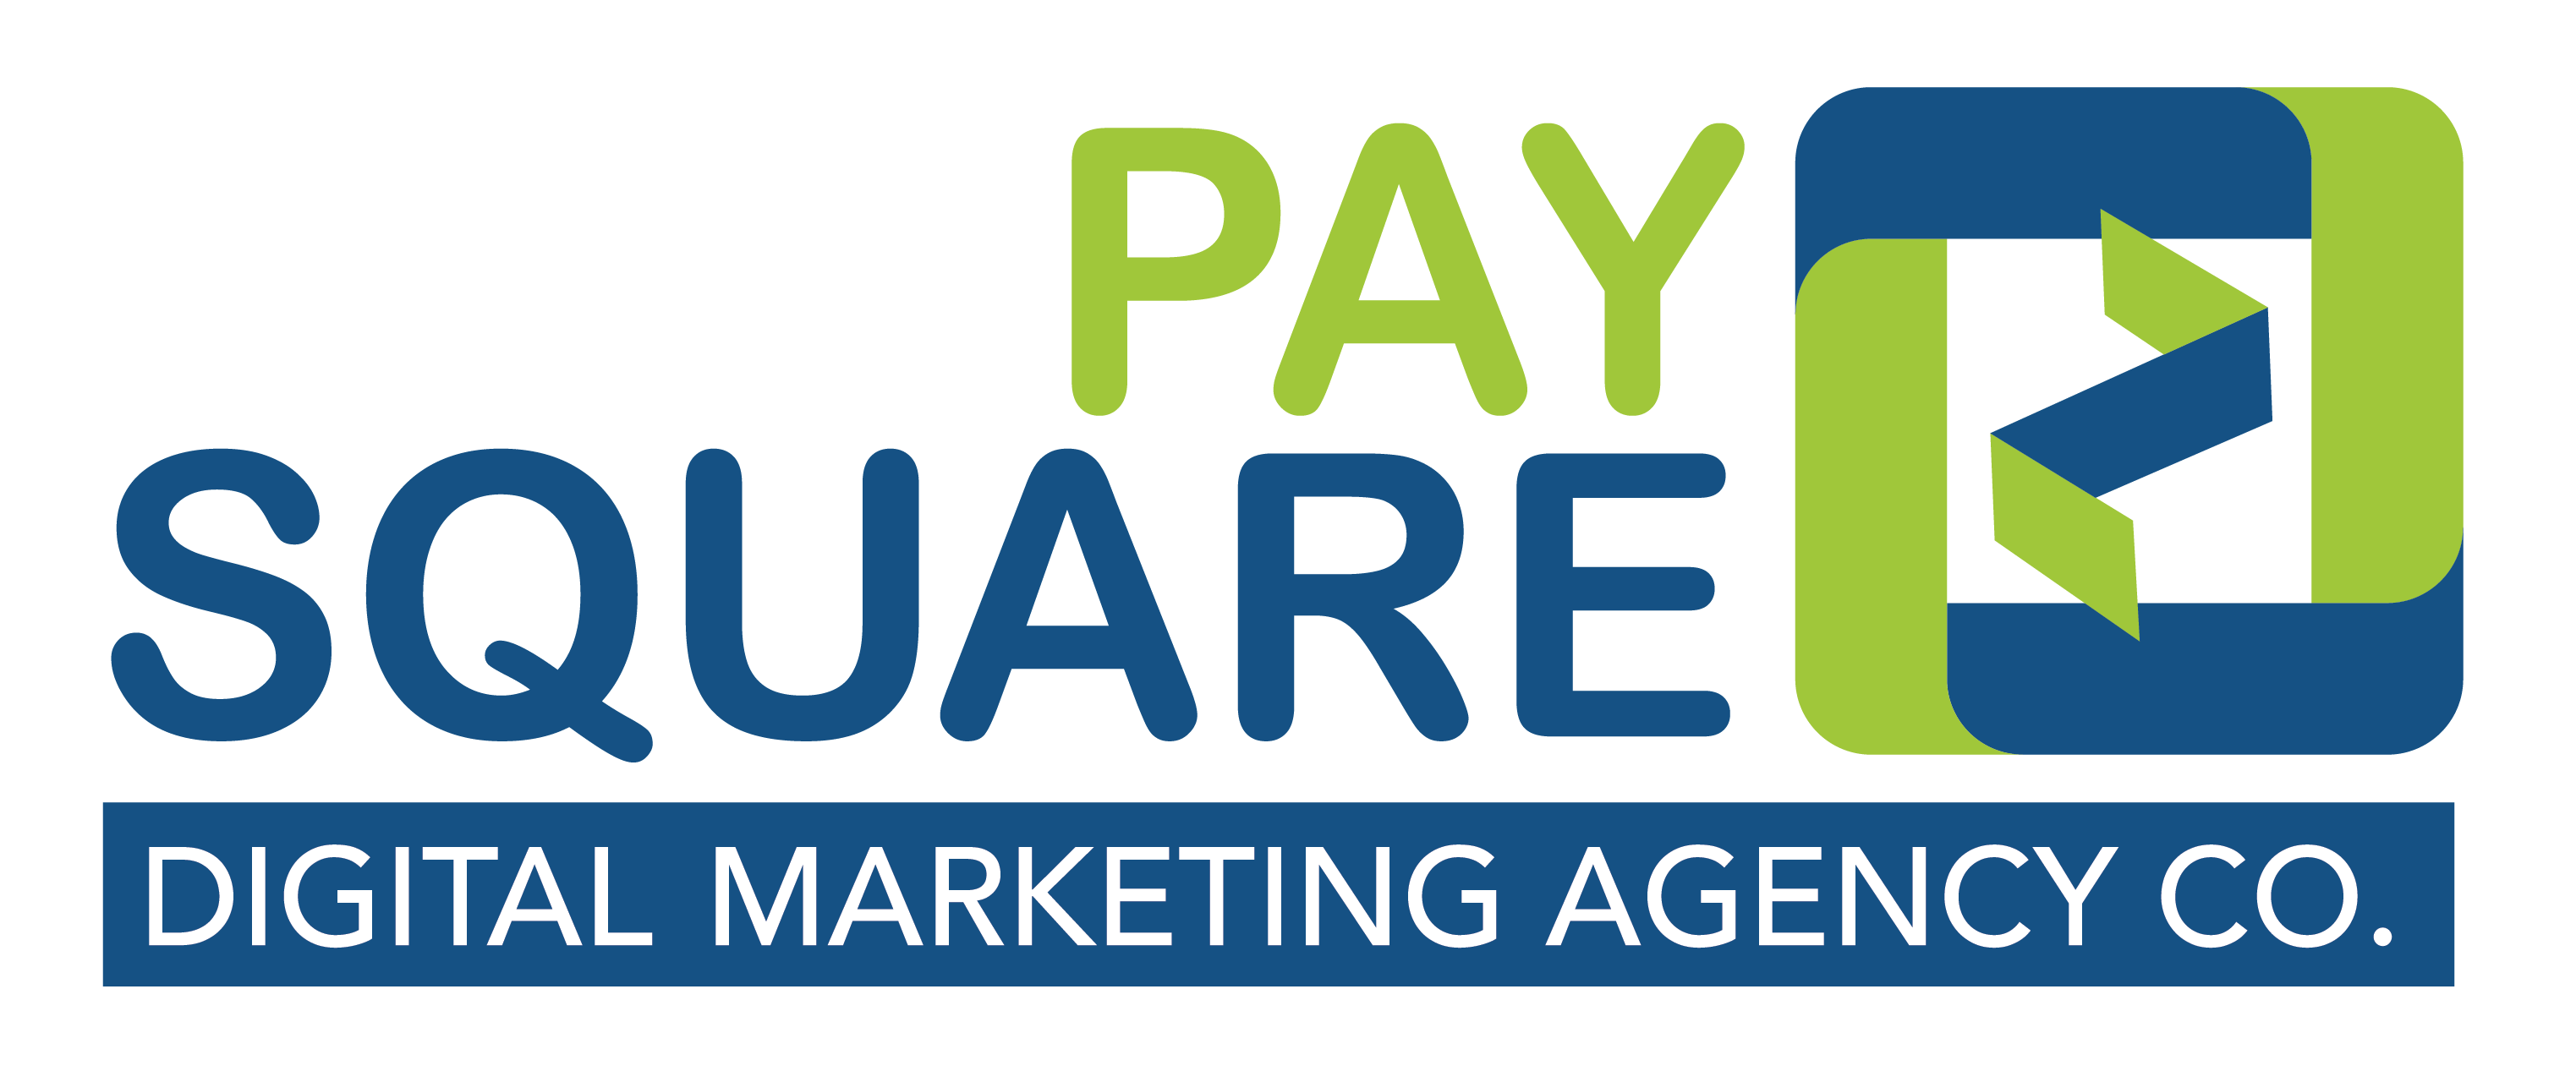 Pay with Square Logo - Home page - Pay 2 Square